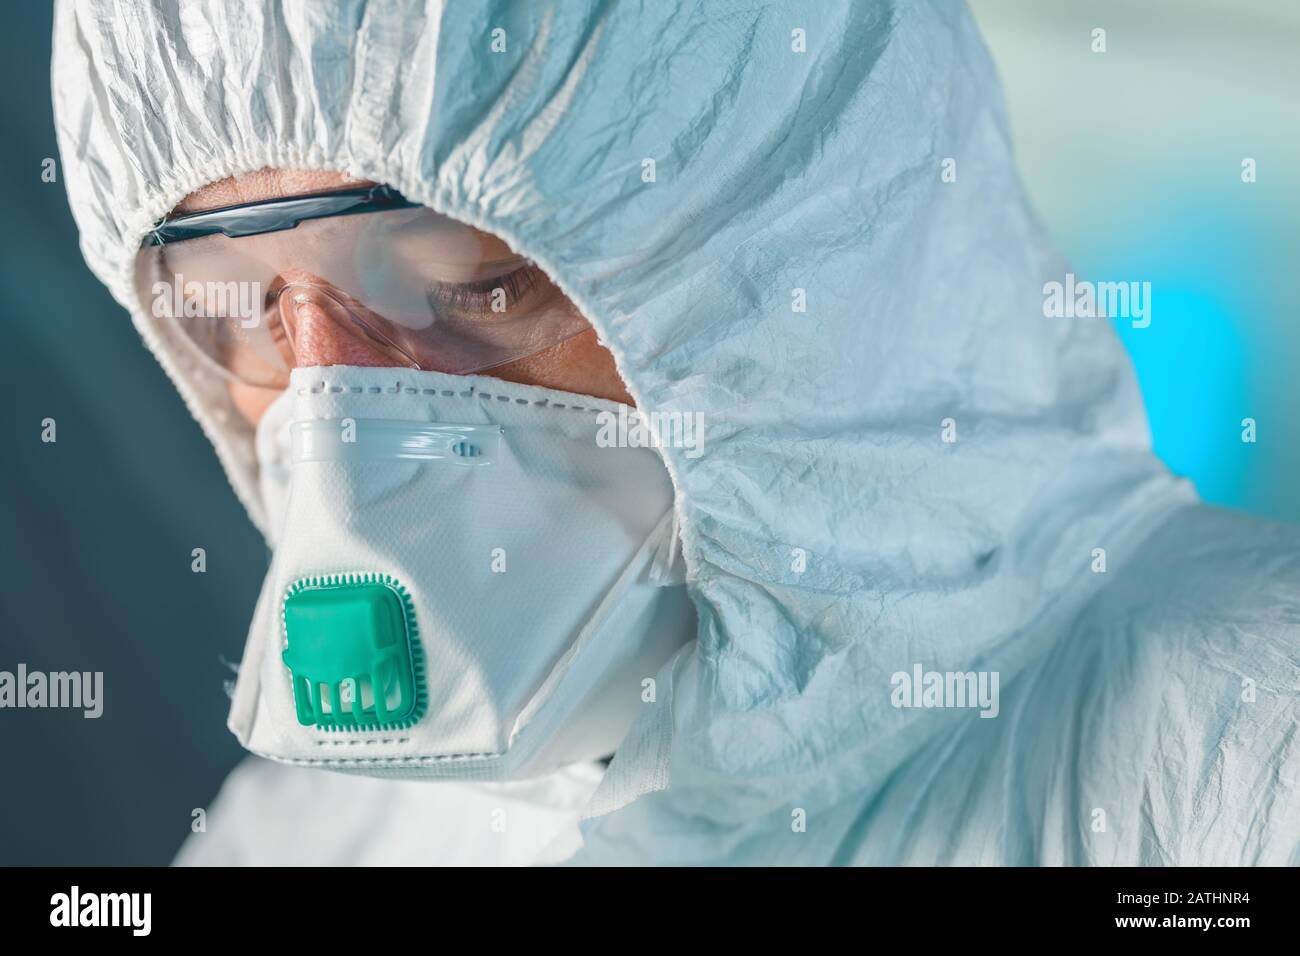 Worried concerned epidemiology specialist, close up portrait head shot of epidemiologist in protective clothing Stock Photo